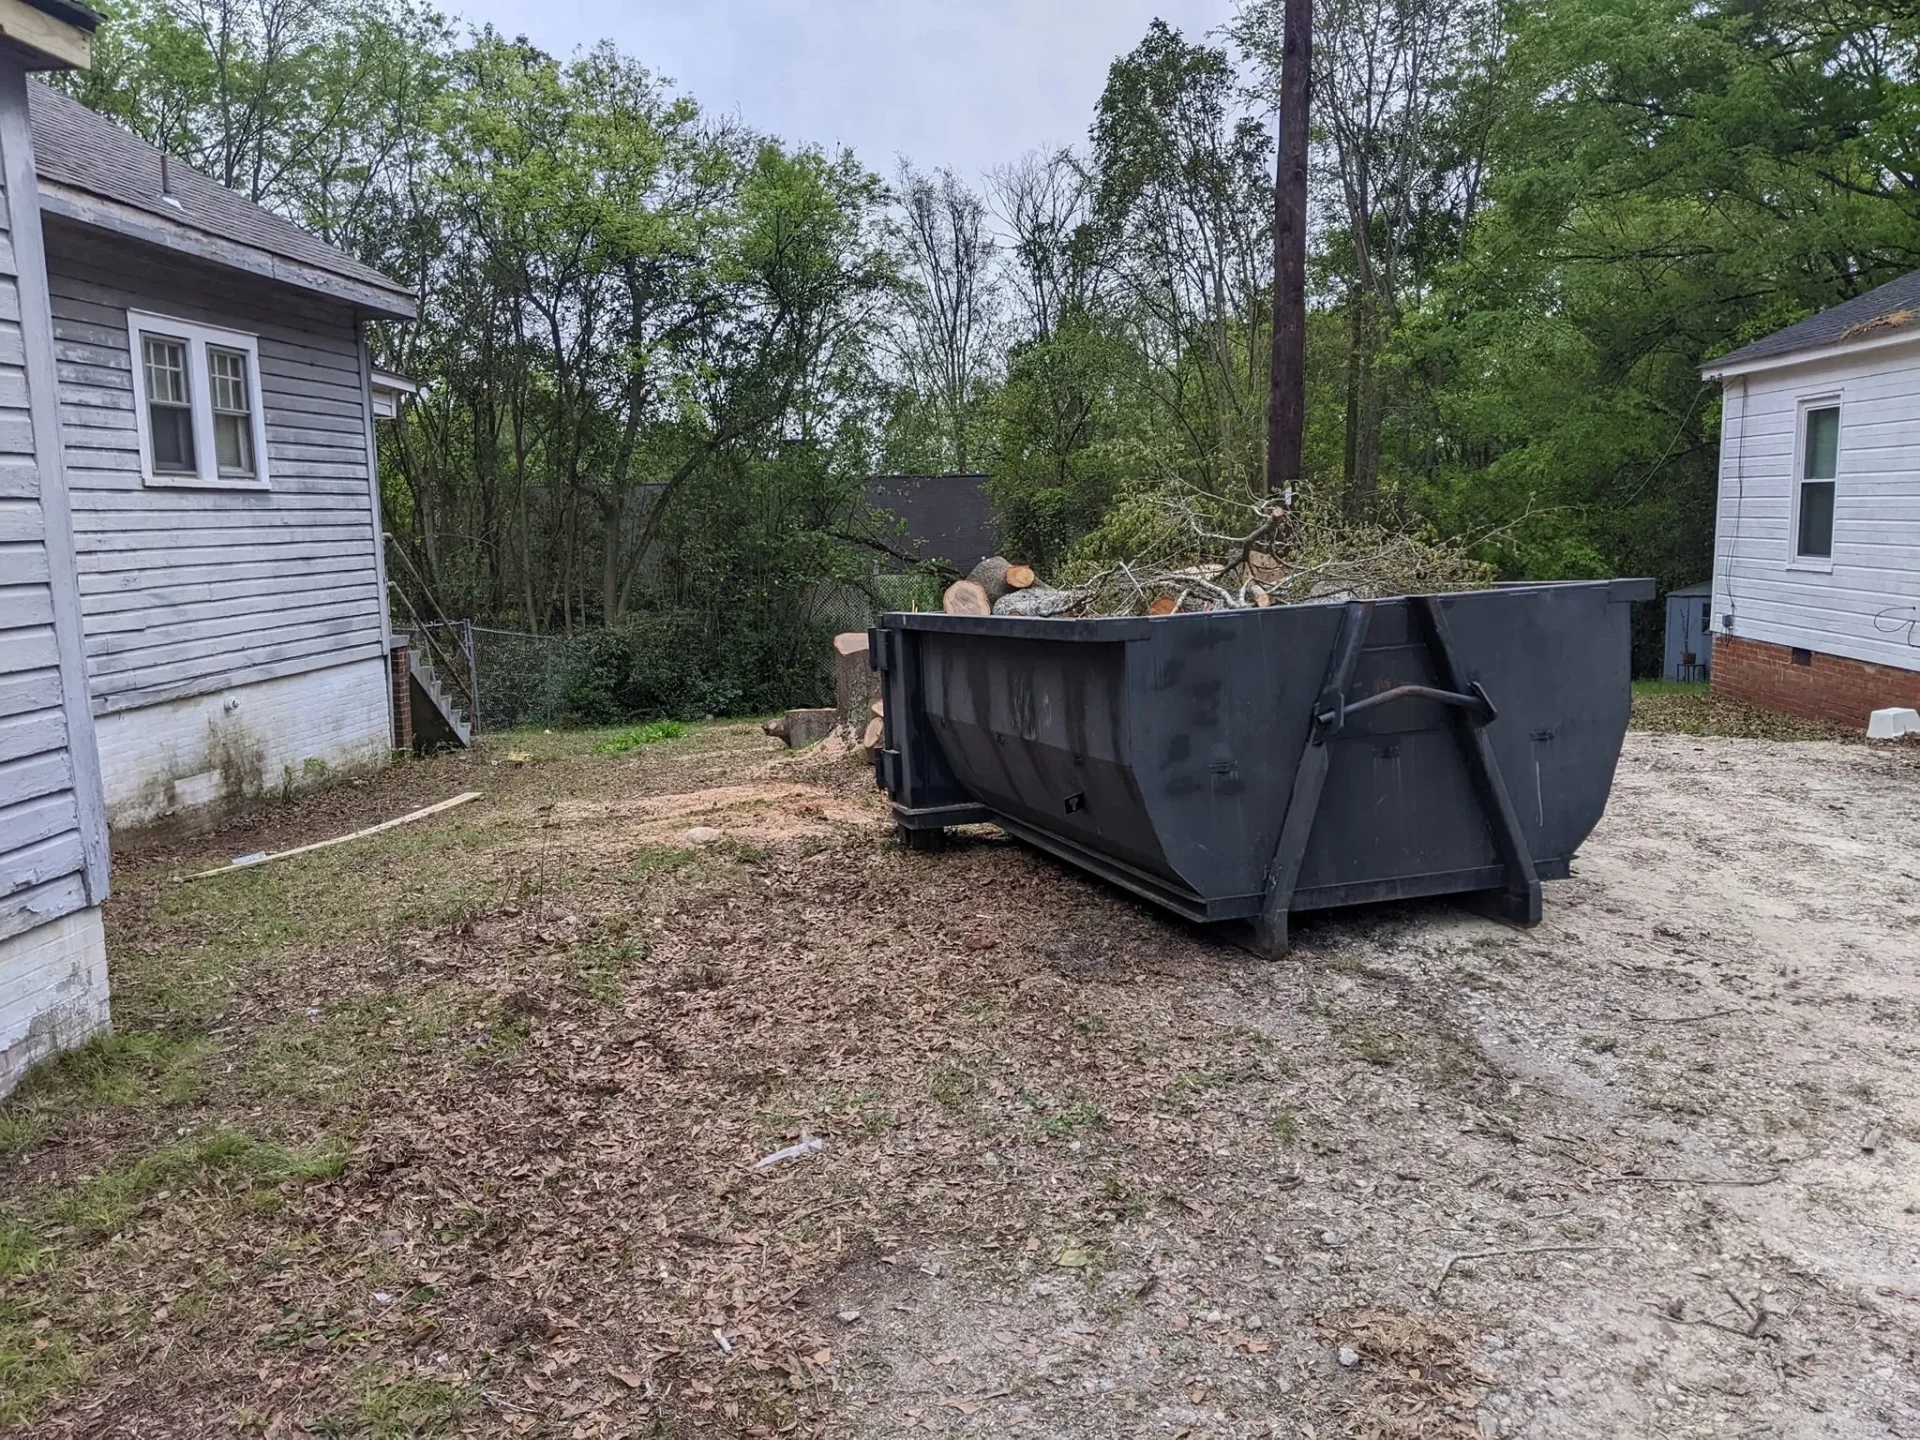 A dumpster with debris in it on the side of a road.